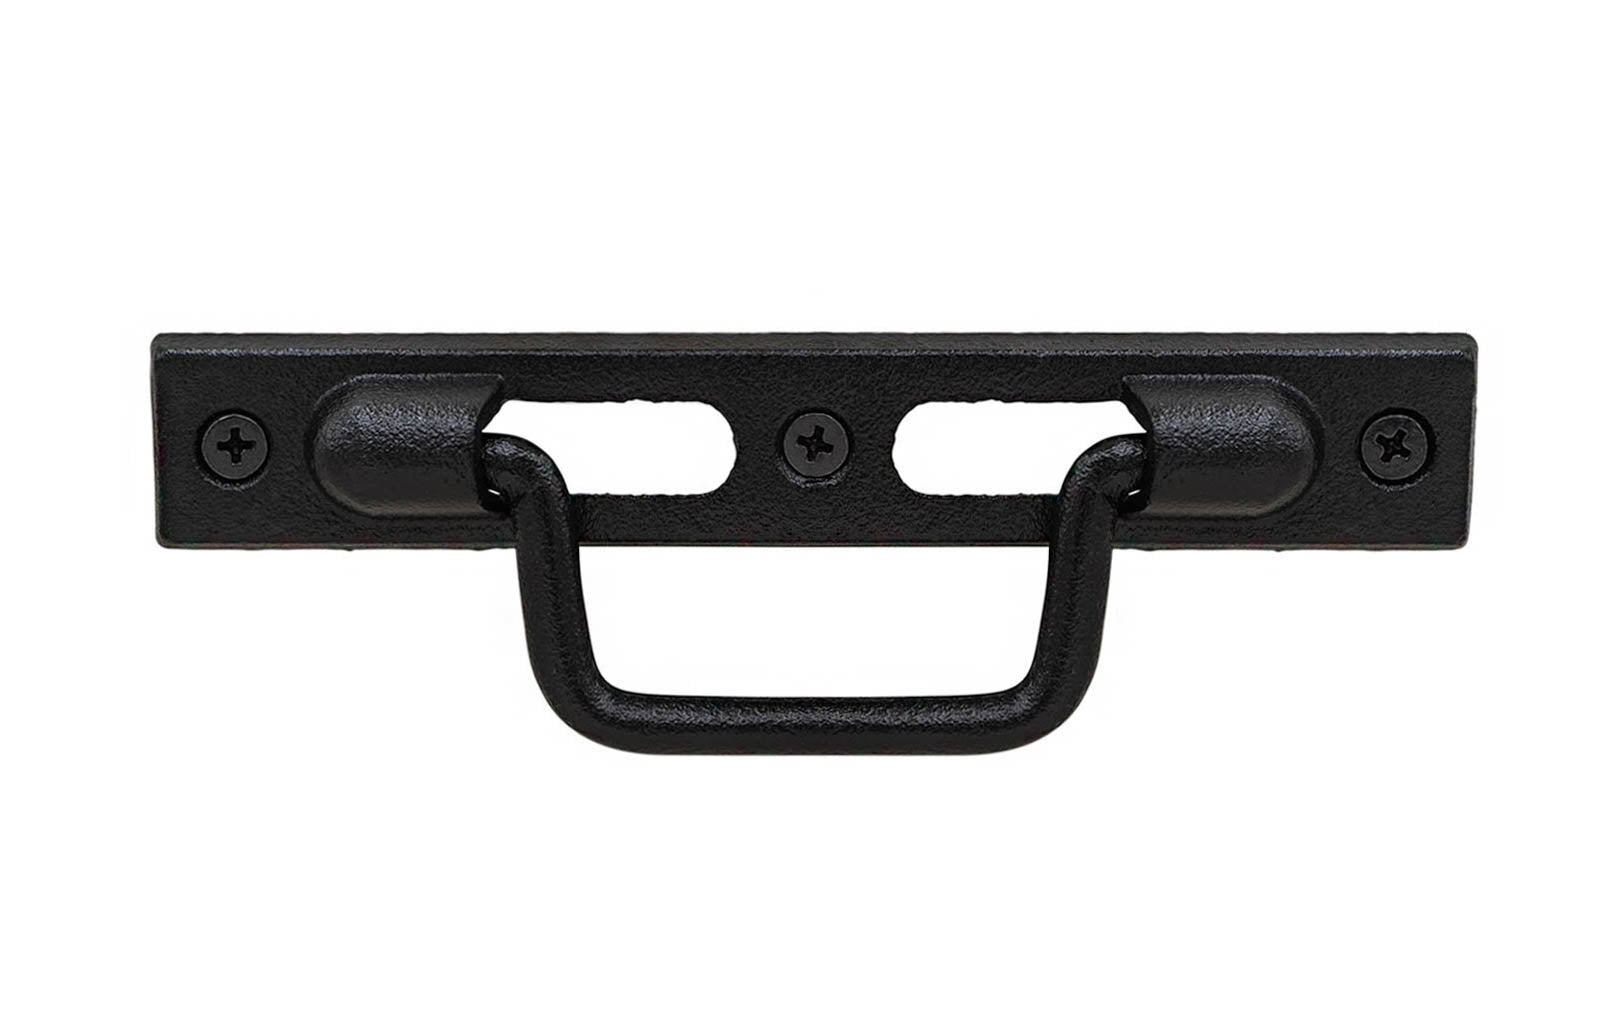 A rustic-looking "Mission-style" cast iron drop pull. Made of cast iron material, this bin pull is thick & stout. Drop pull D-handle allows for many different uses, including use on trunks. Great for drawers, cabinets, furniture. 5-1/2" on Centers - Drawer Pull. Cast Iron D-Handle Pull. Cast Iron Mission Pull Handle